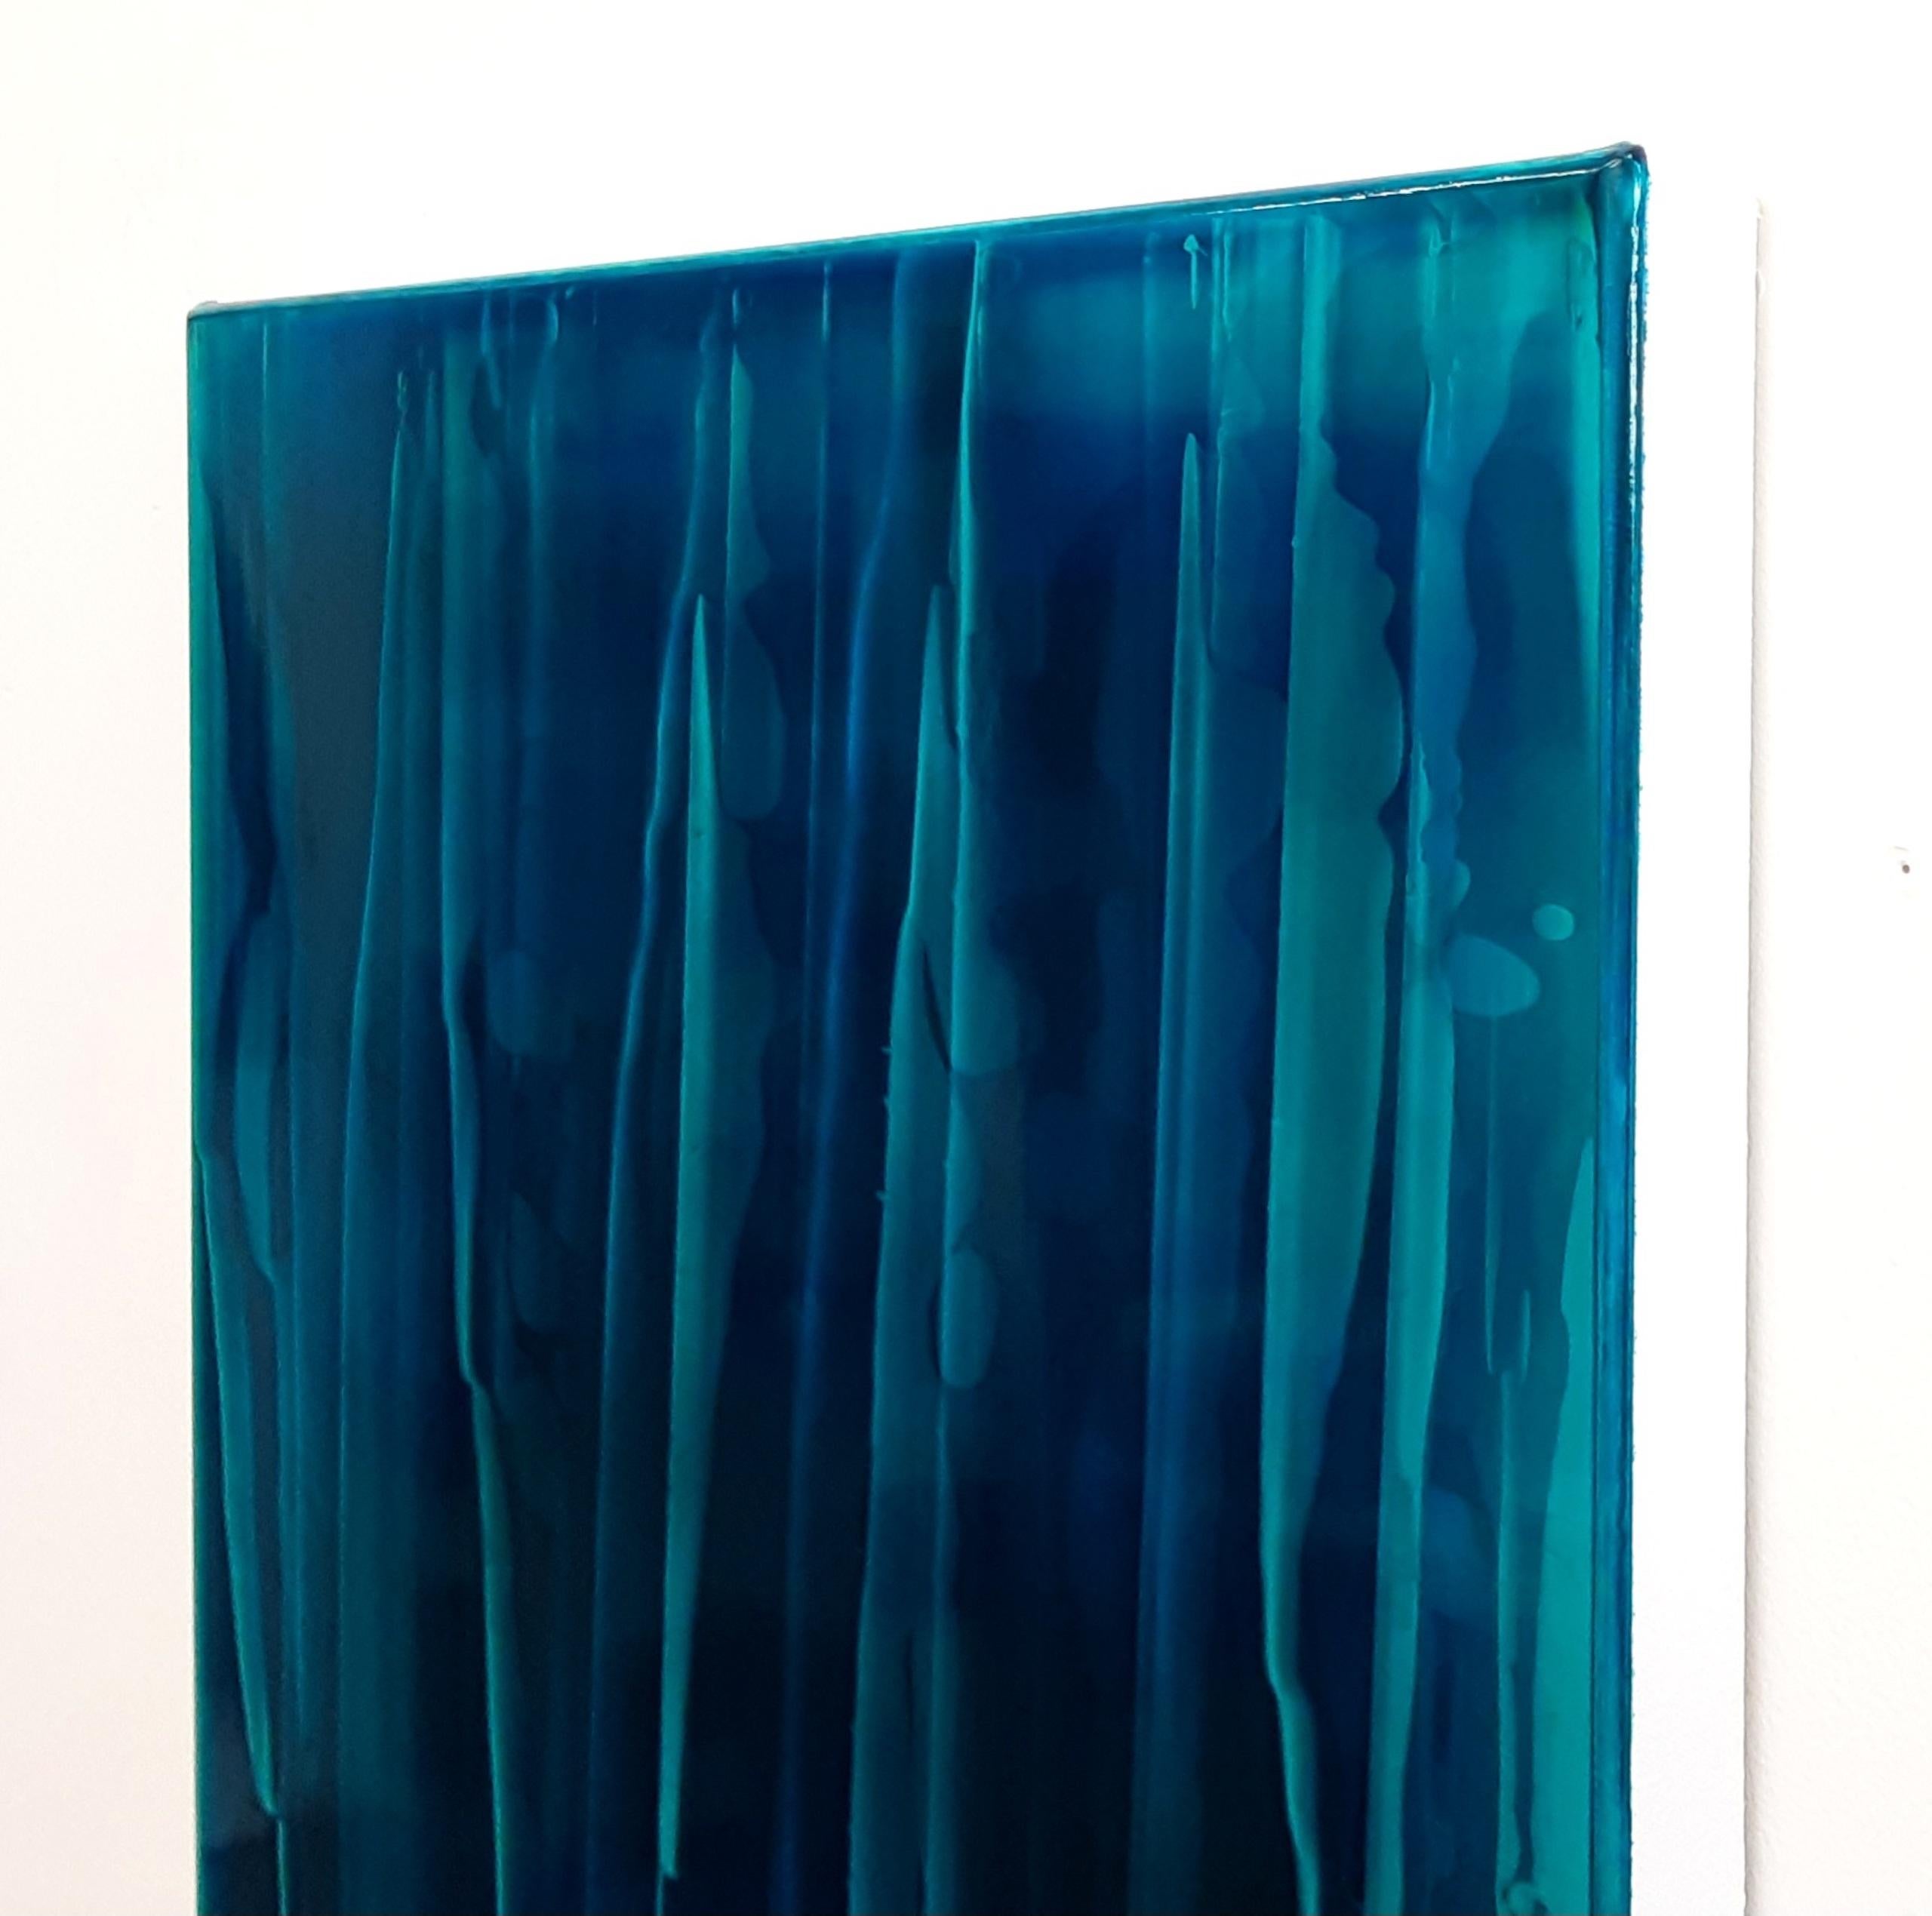 Echoes (1/19) by James Lumsden - Abstract colour painting, blue tones, gloss For Sale 6